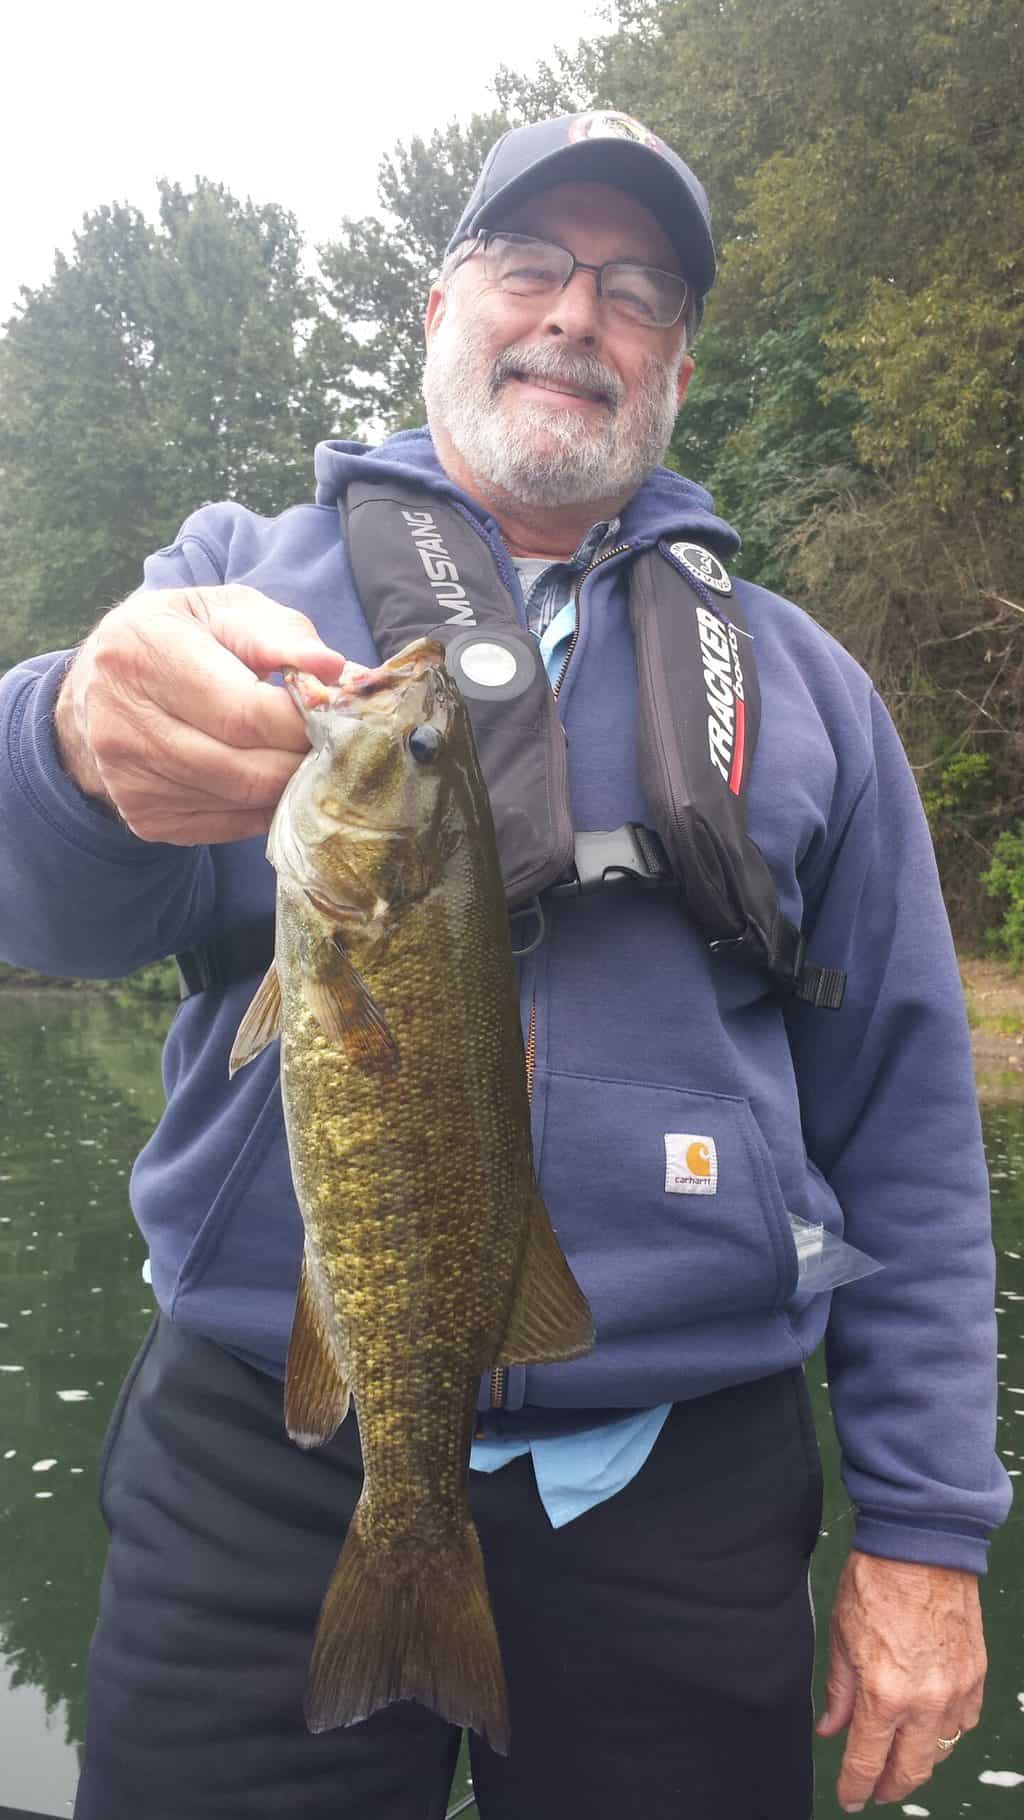 An angler holding a smallmouth bass caught at willamette river.